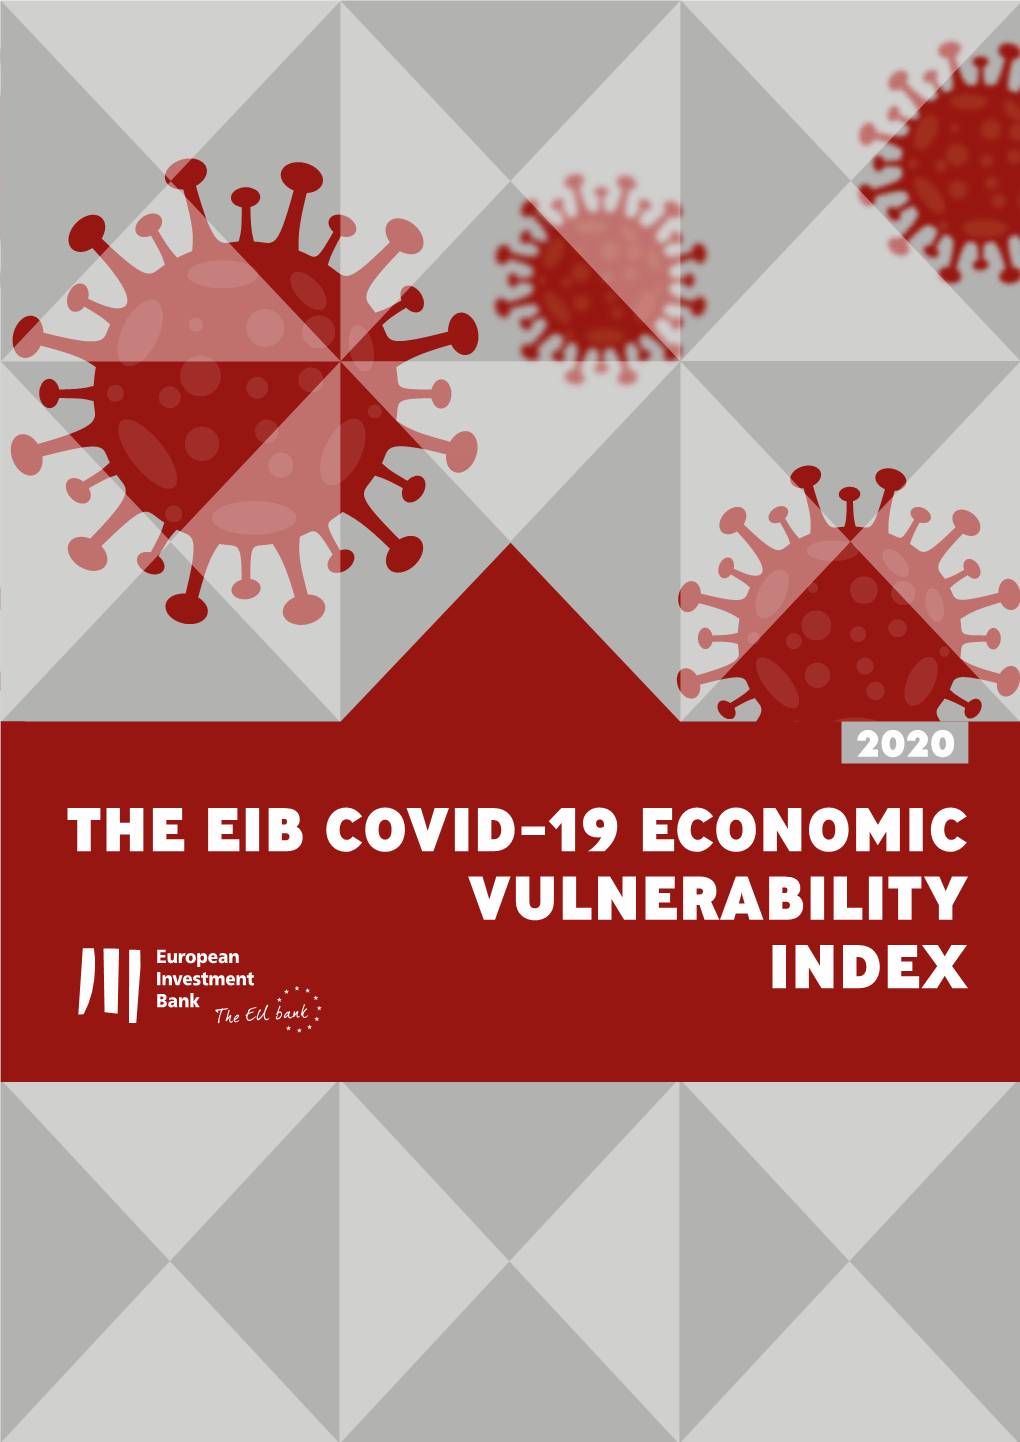 The EIB COVID-19 Economic Vulnerability Index – an Analysis of Countries Outside the European Union